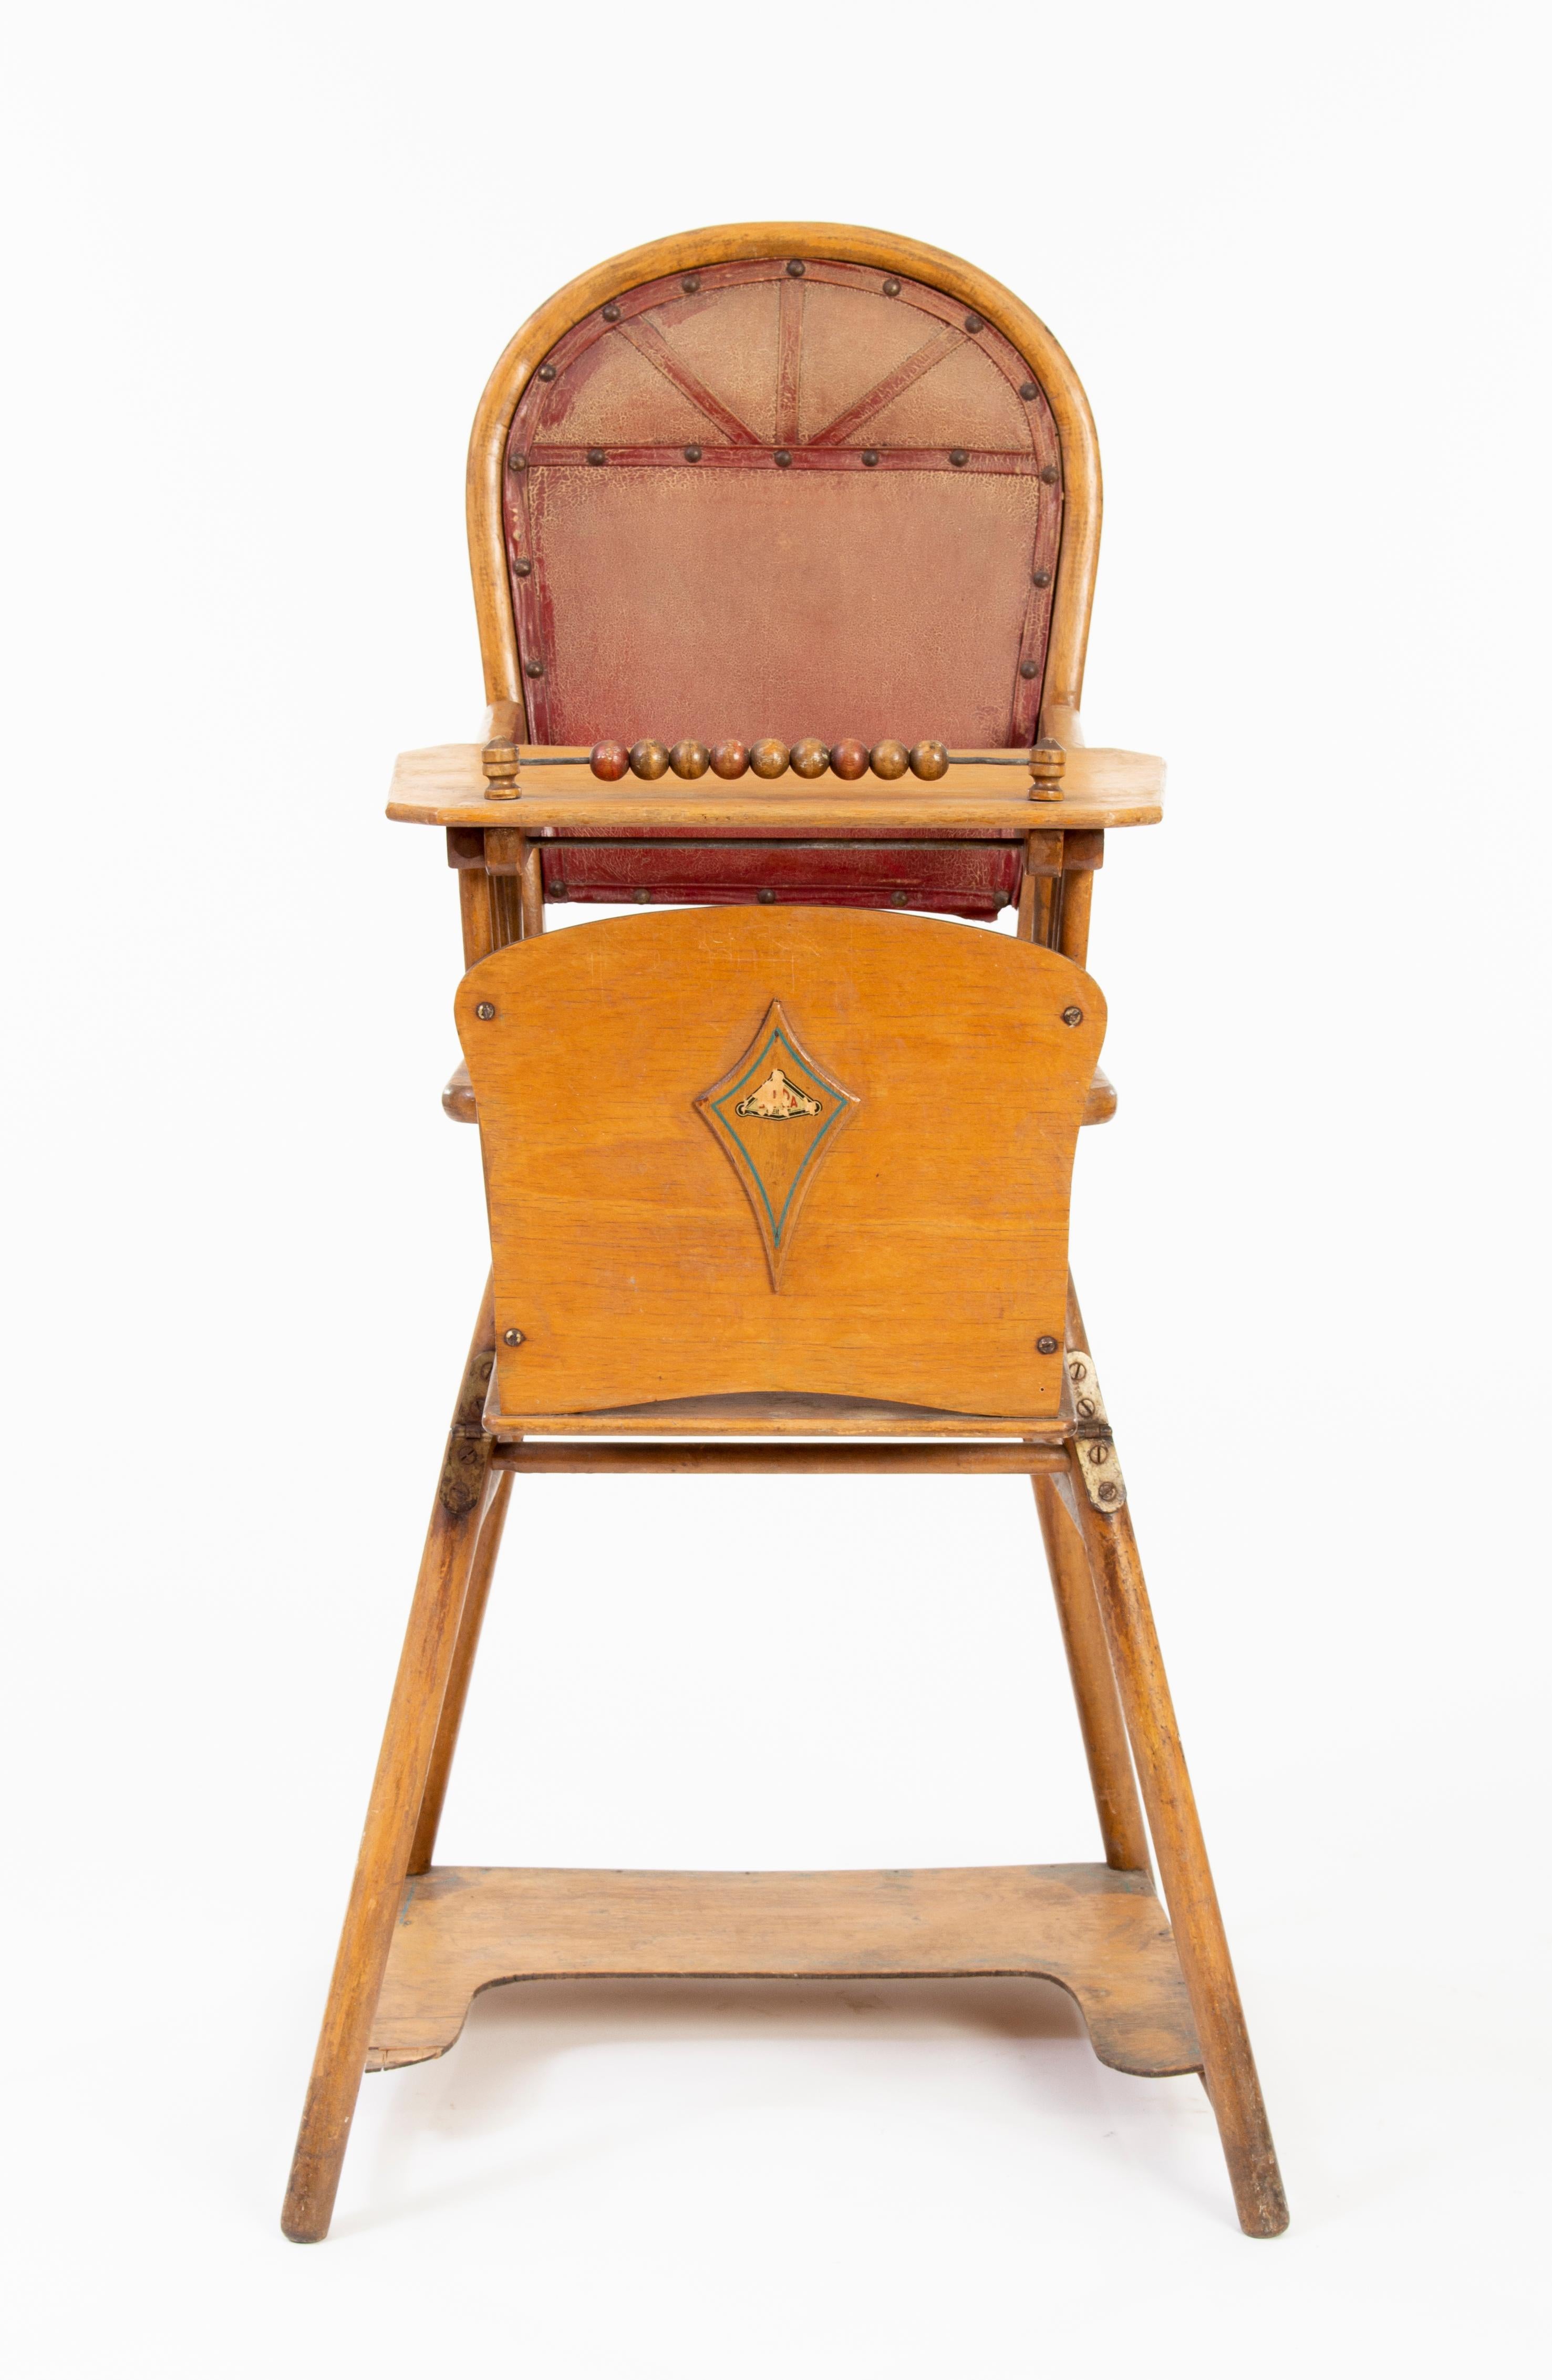 Antique children's highchair with an abacus and potty chair functions.
Made of steamed beechwood, with leather cover.
Manufactured around 1910.
 